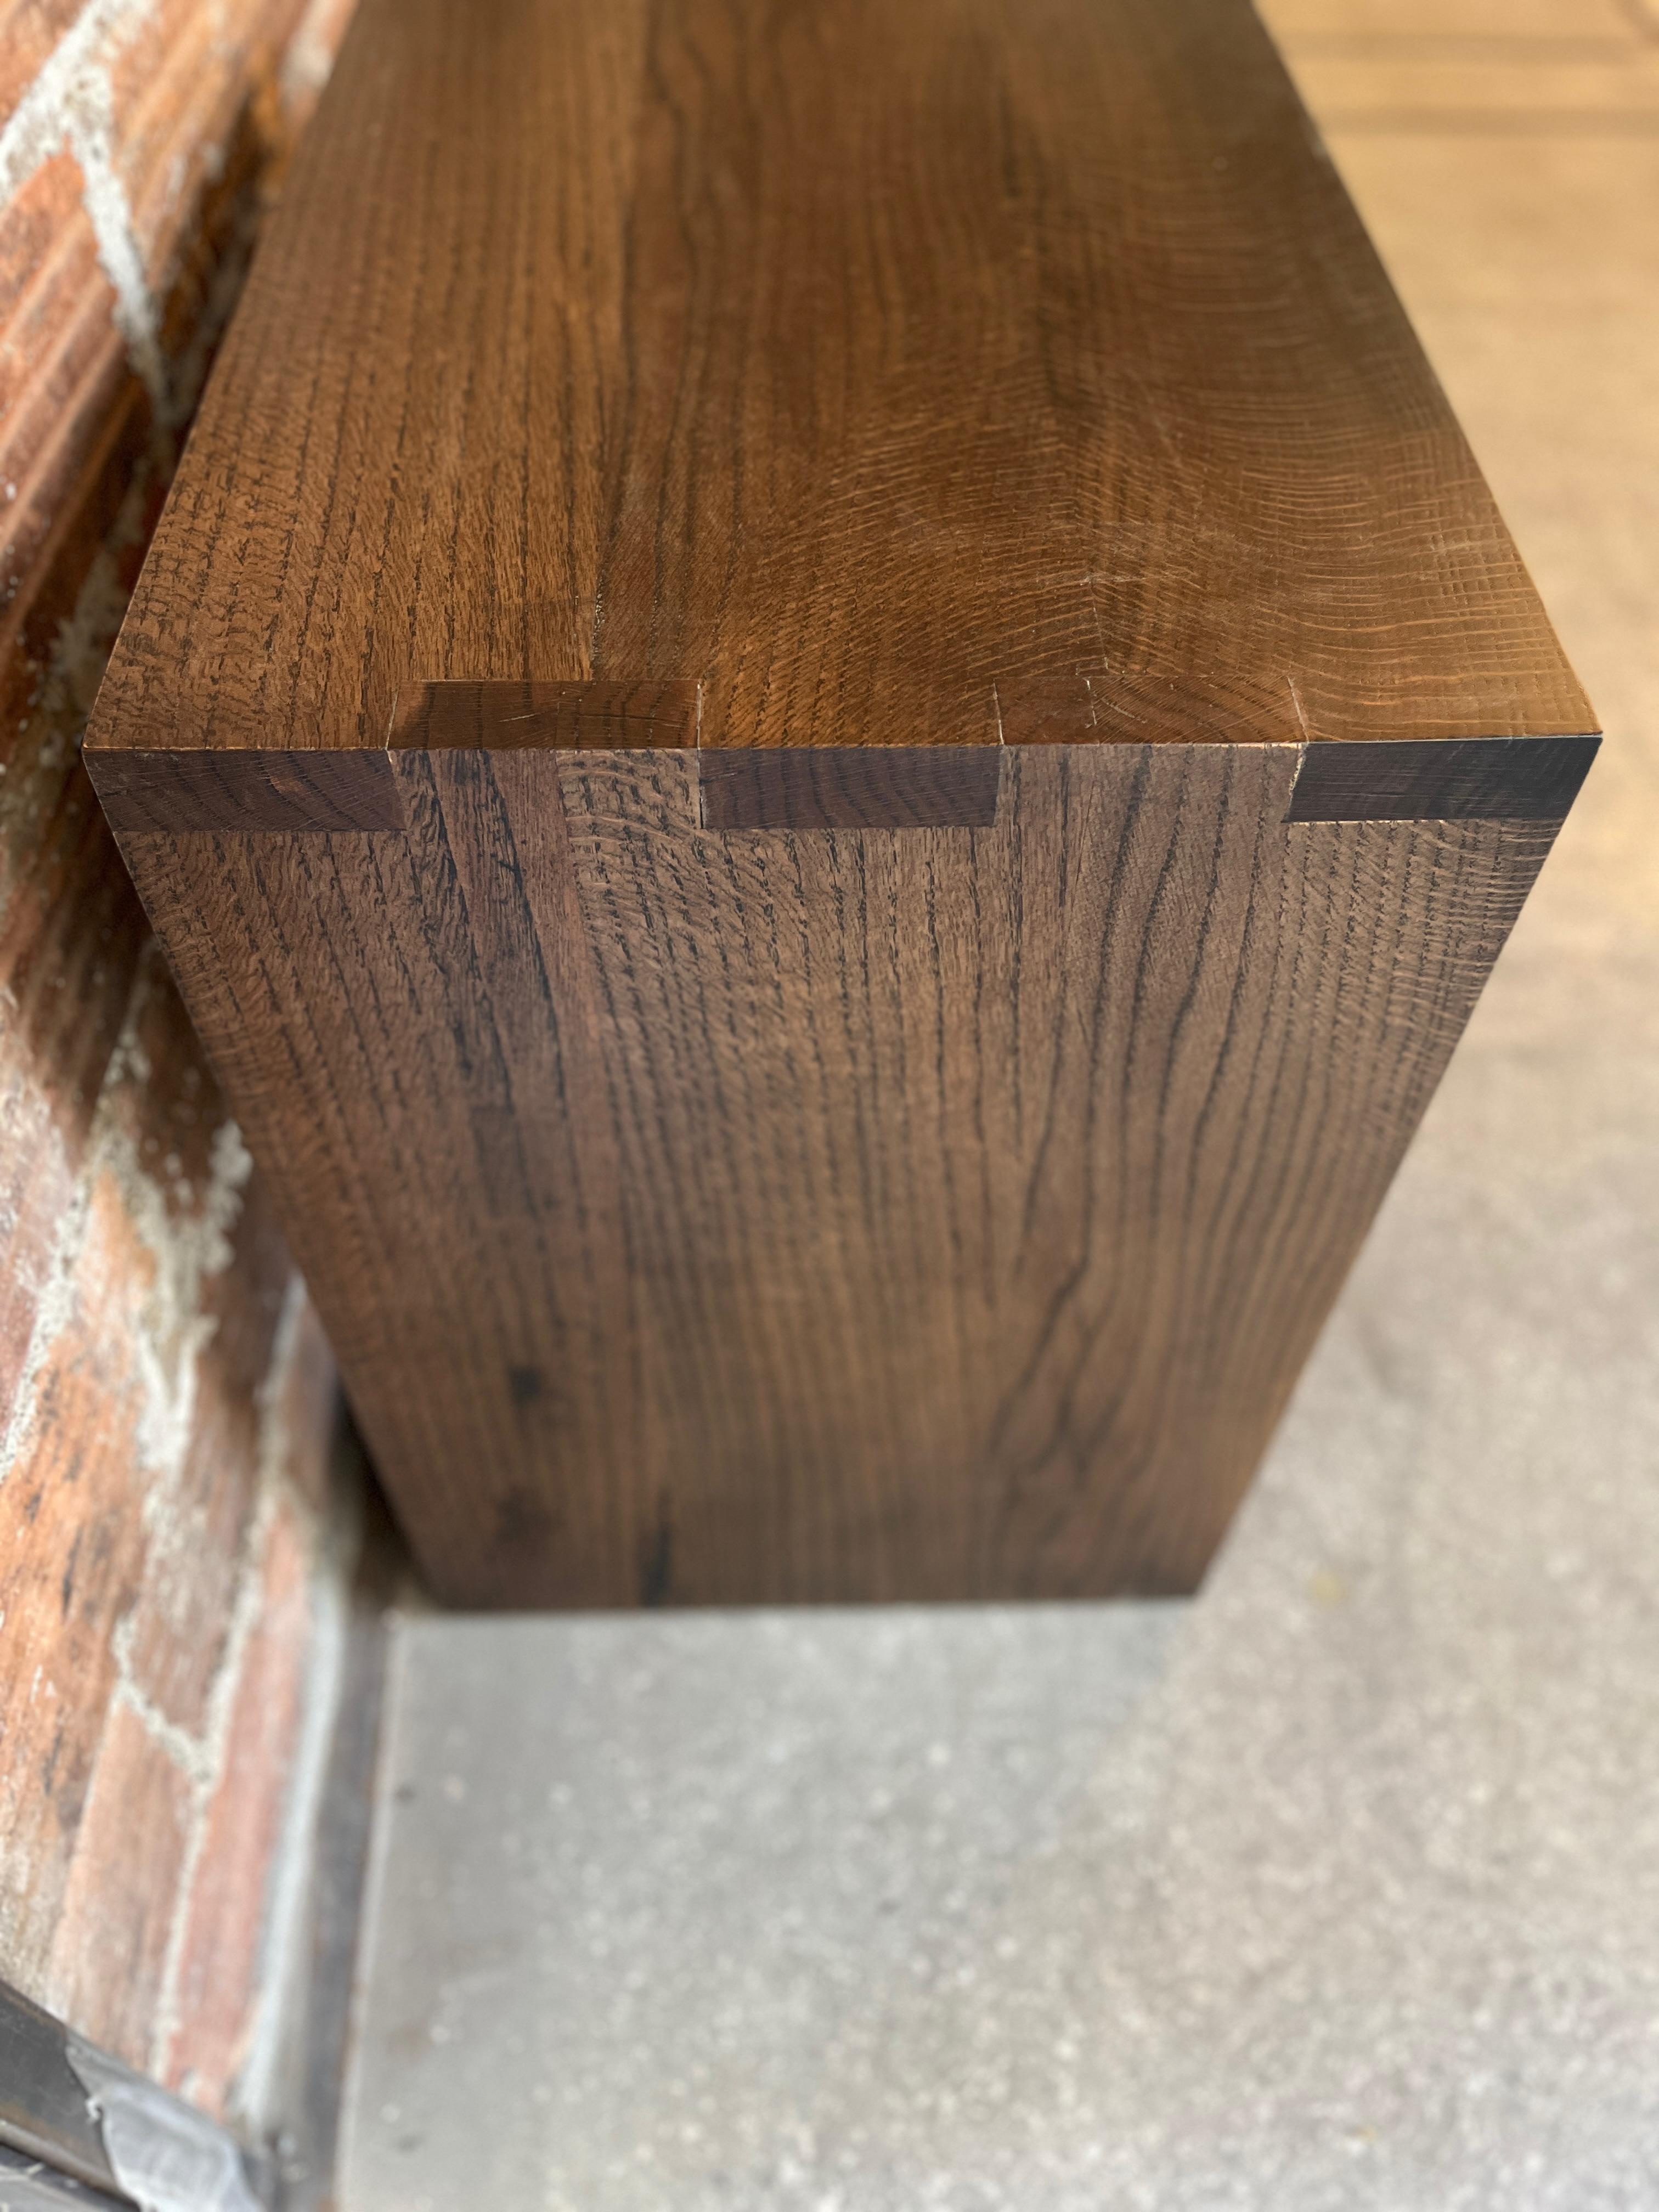 We handcrafted this classic bedside table with hardwoods from Birmingham's urban forest. For your bedroom, it can hold books, reading glasses, a lamp or glass of water. A single drawer allows some items to stay discreet or keep your phone of sight,